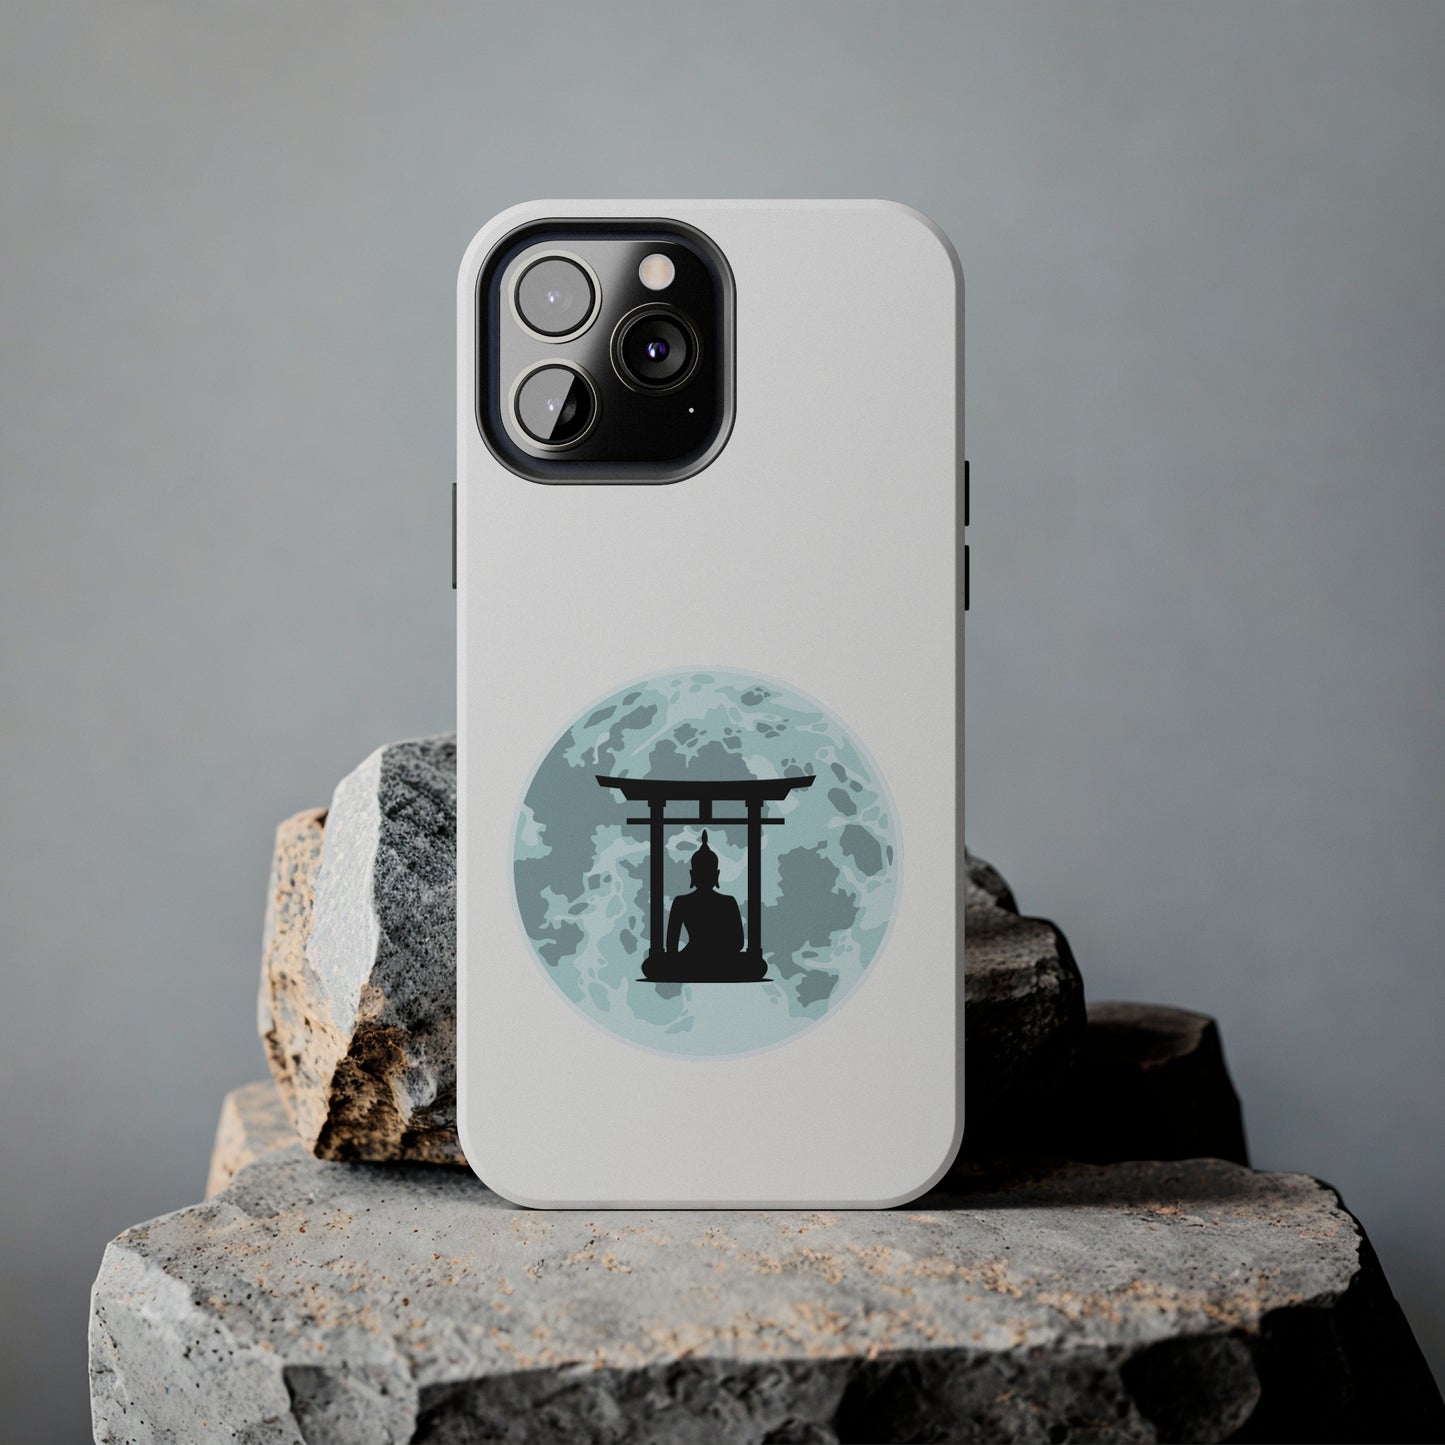 Celebrating Full Moon day of Waso with a tough phone case